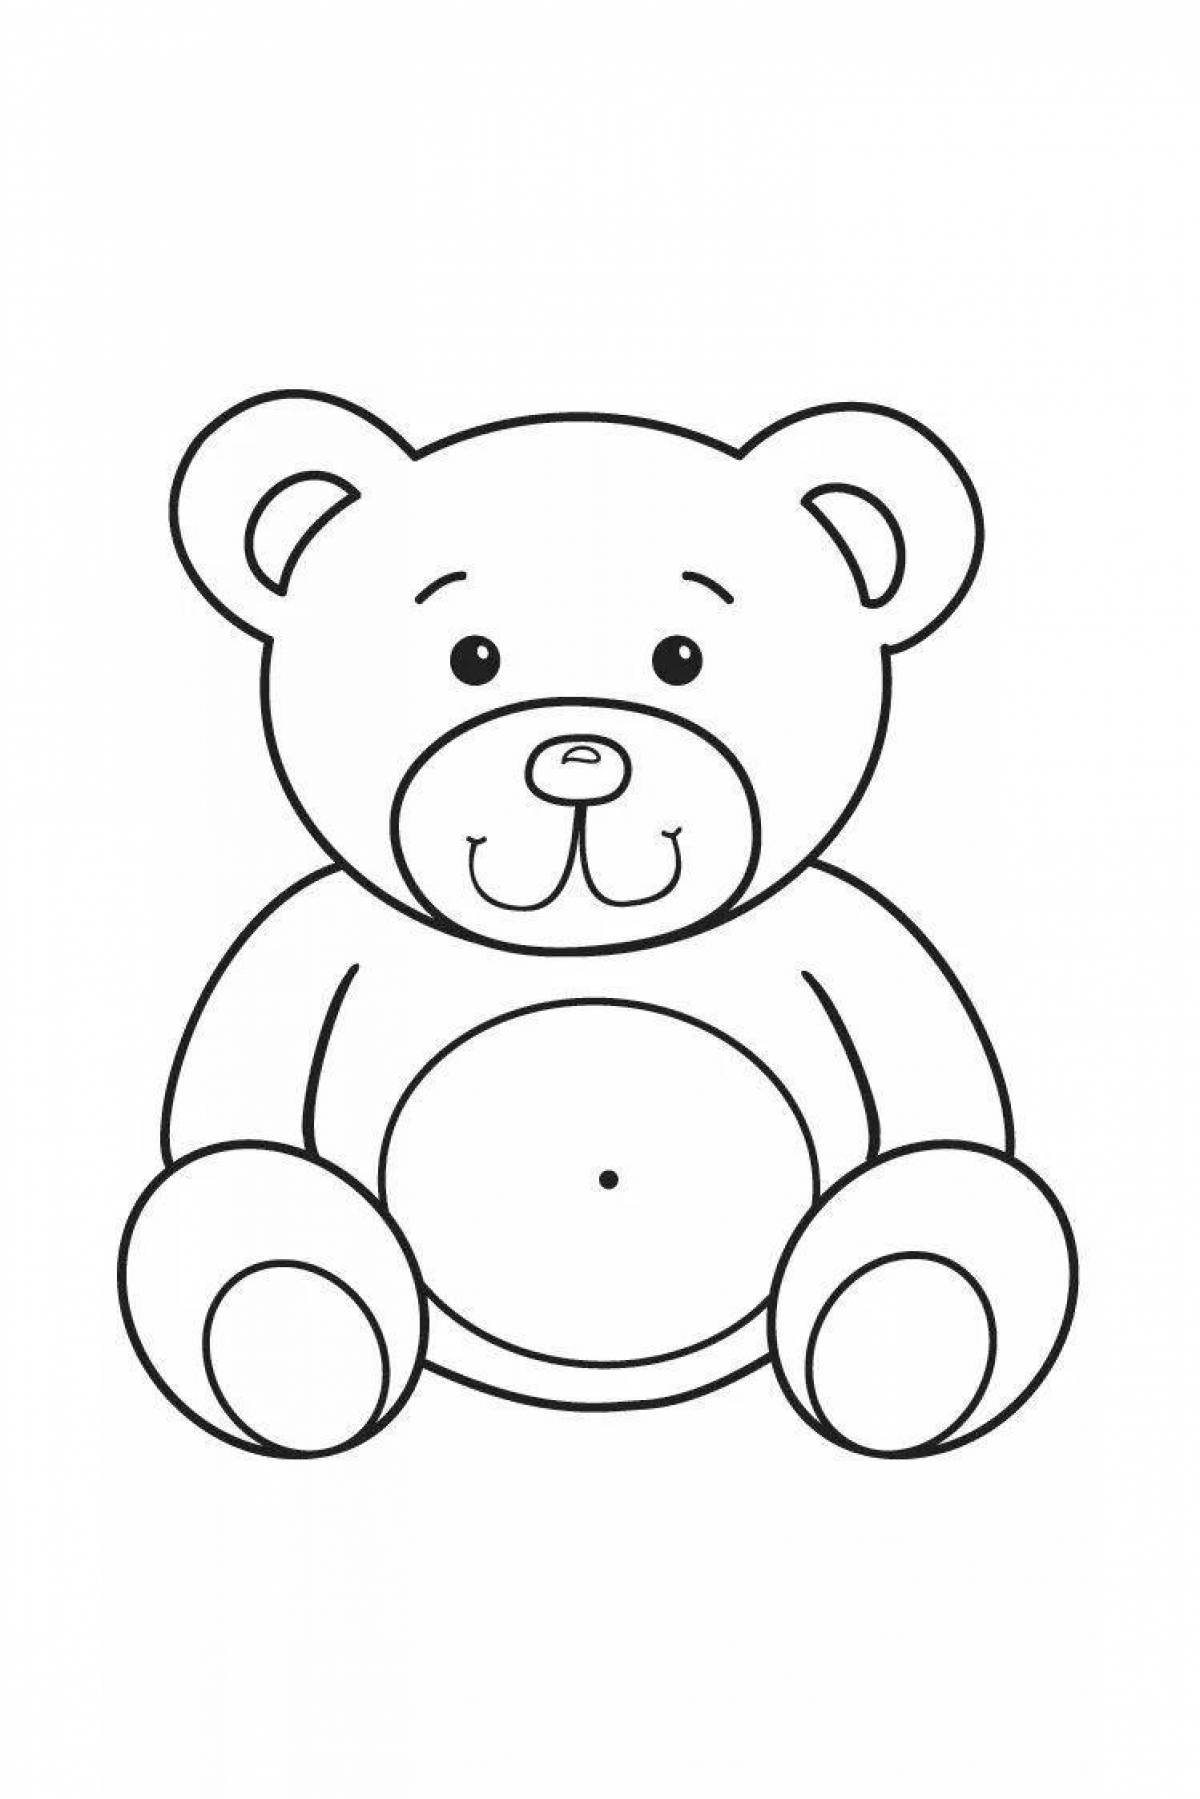 Beautiful jelly bear coloring page